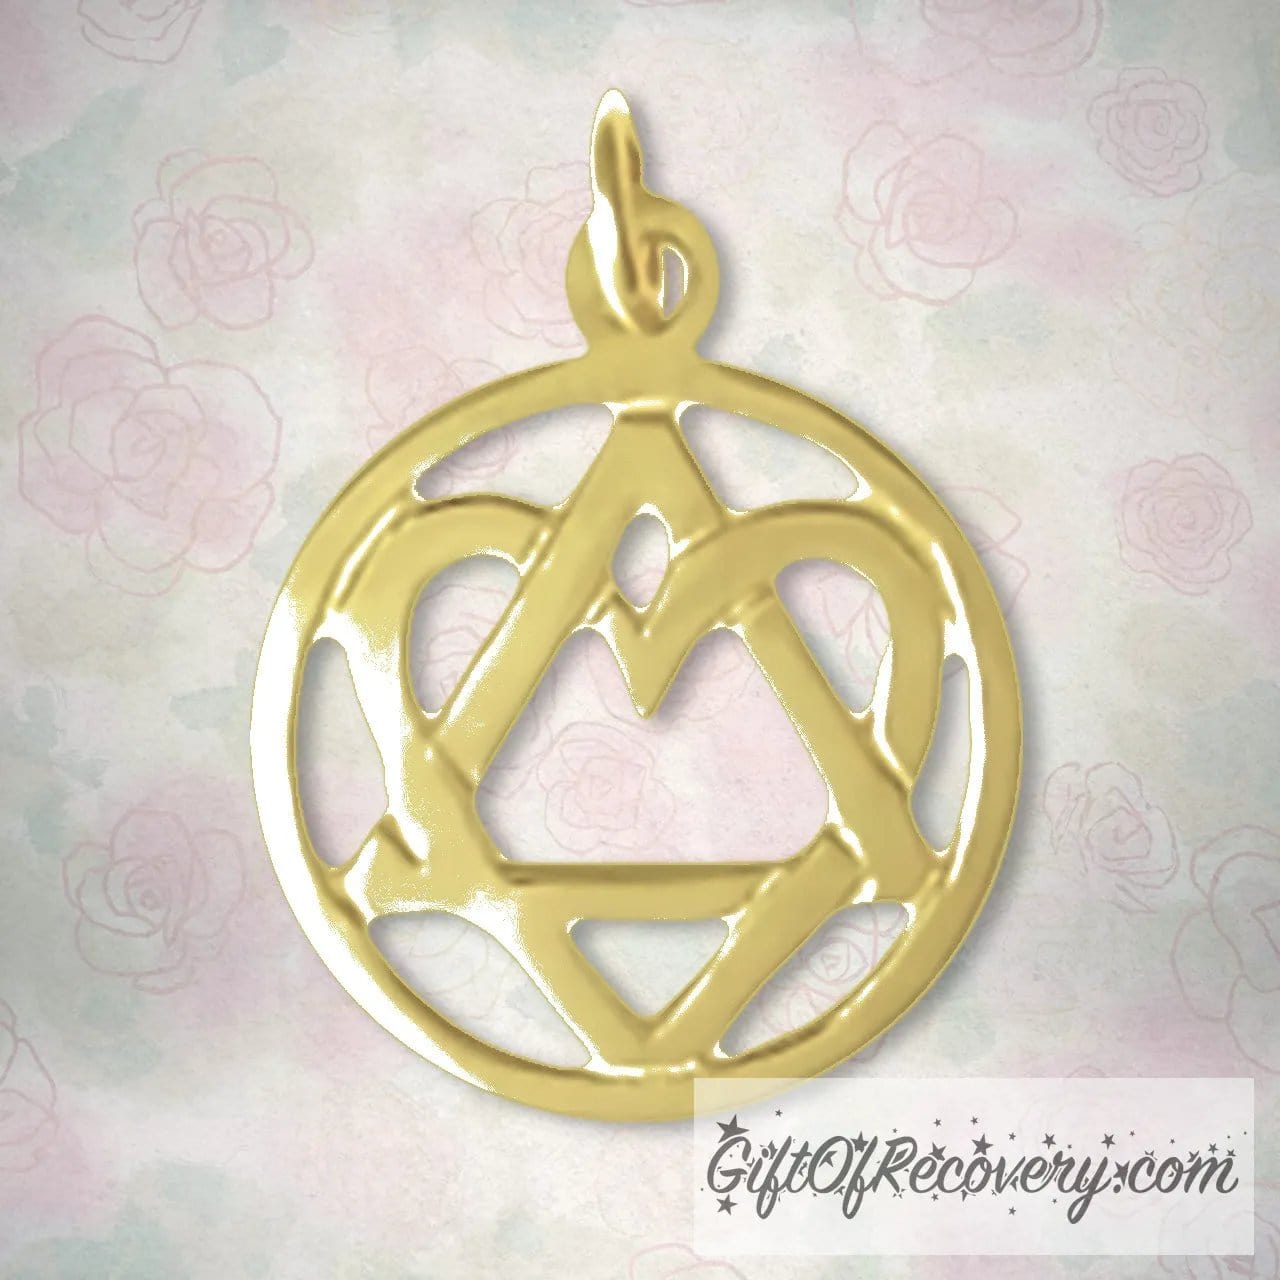 14K Gold, AA Symbol Pendant With A Open Heart "Love & Service", Medium Size